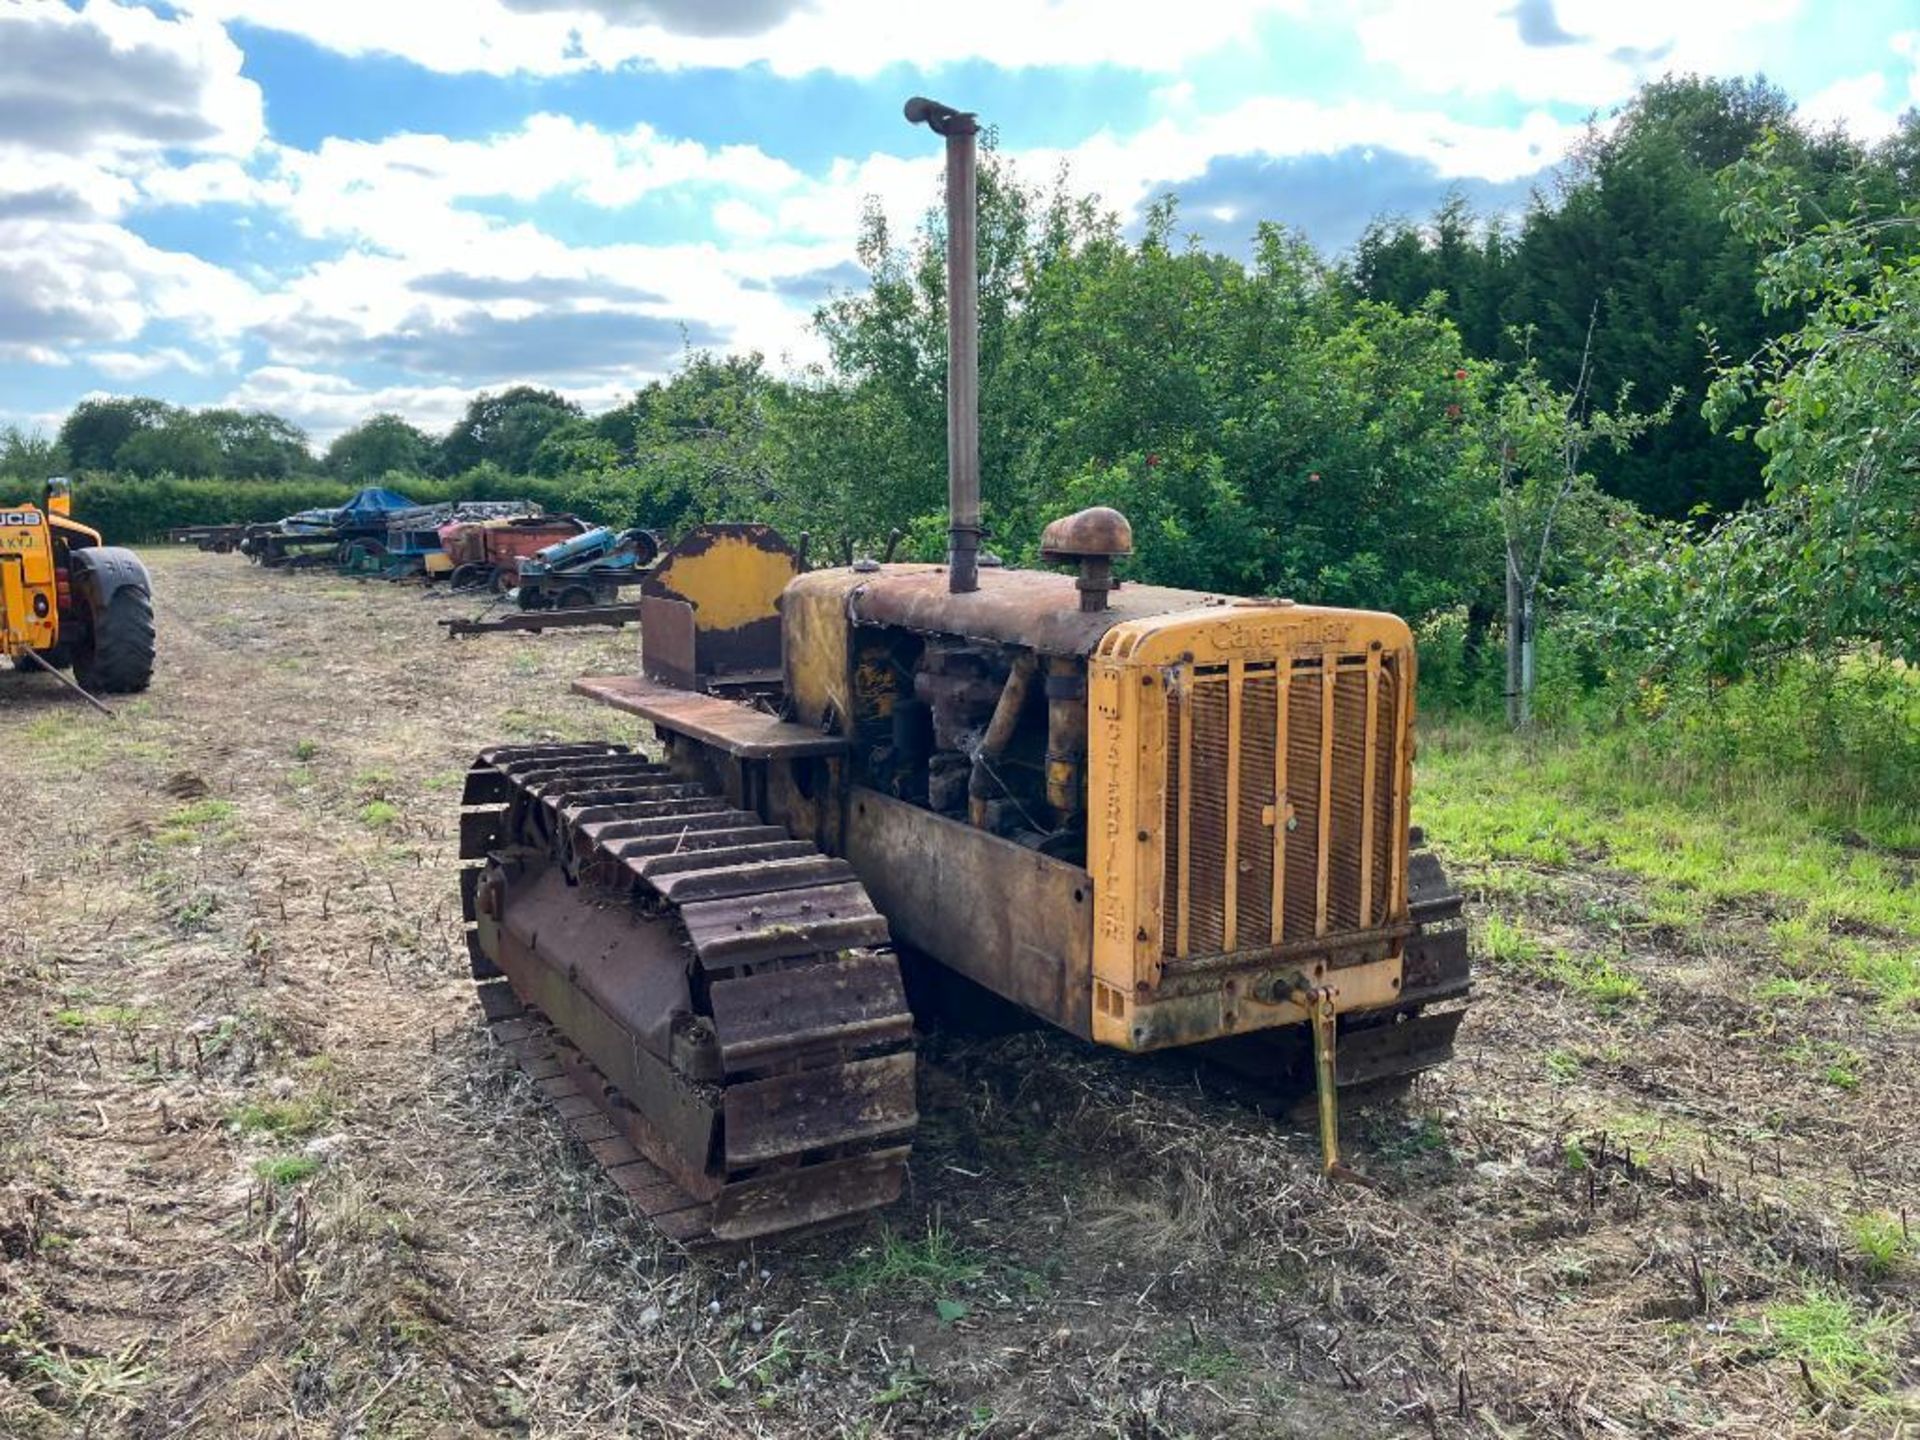 1939 Caterpillar R4 metal tracked crawler with 16" tracks and swinging drawbar. Serial No: 6G1021WS - Image 11 of 14